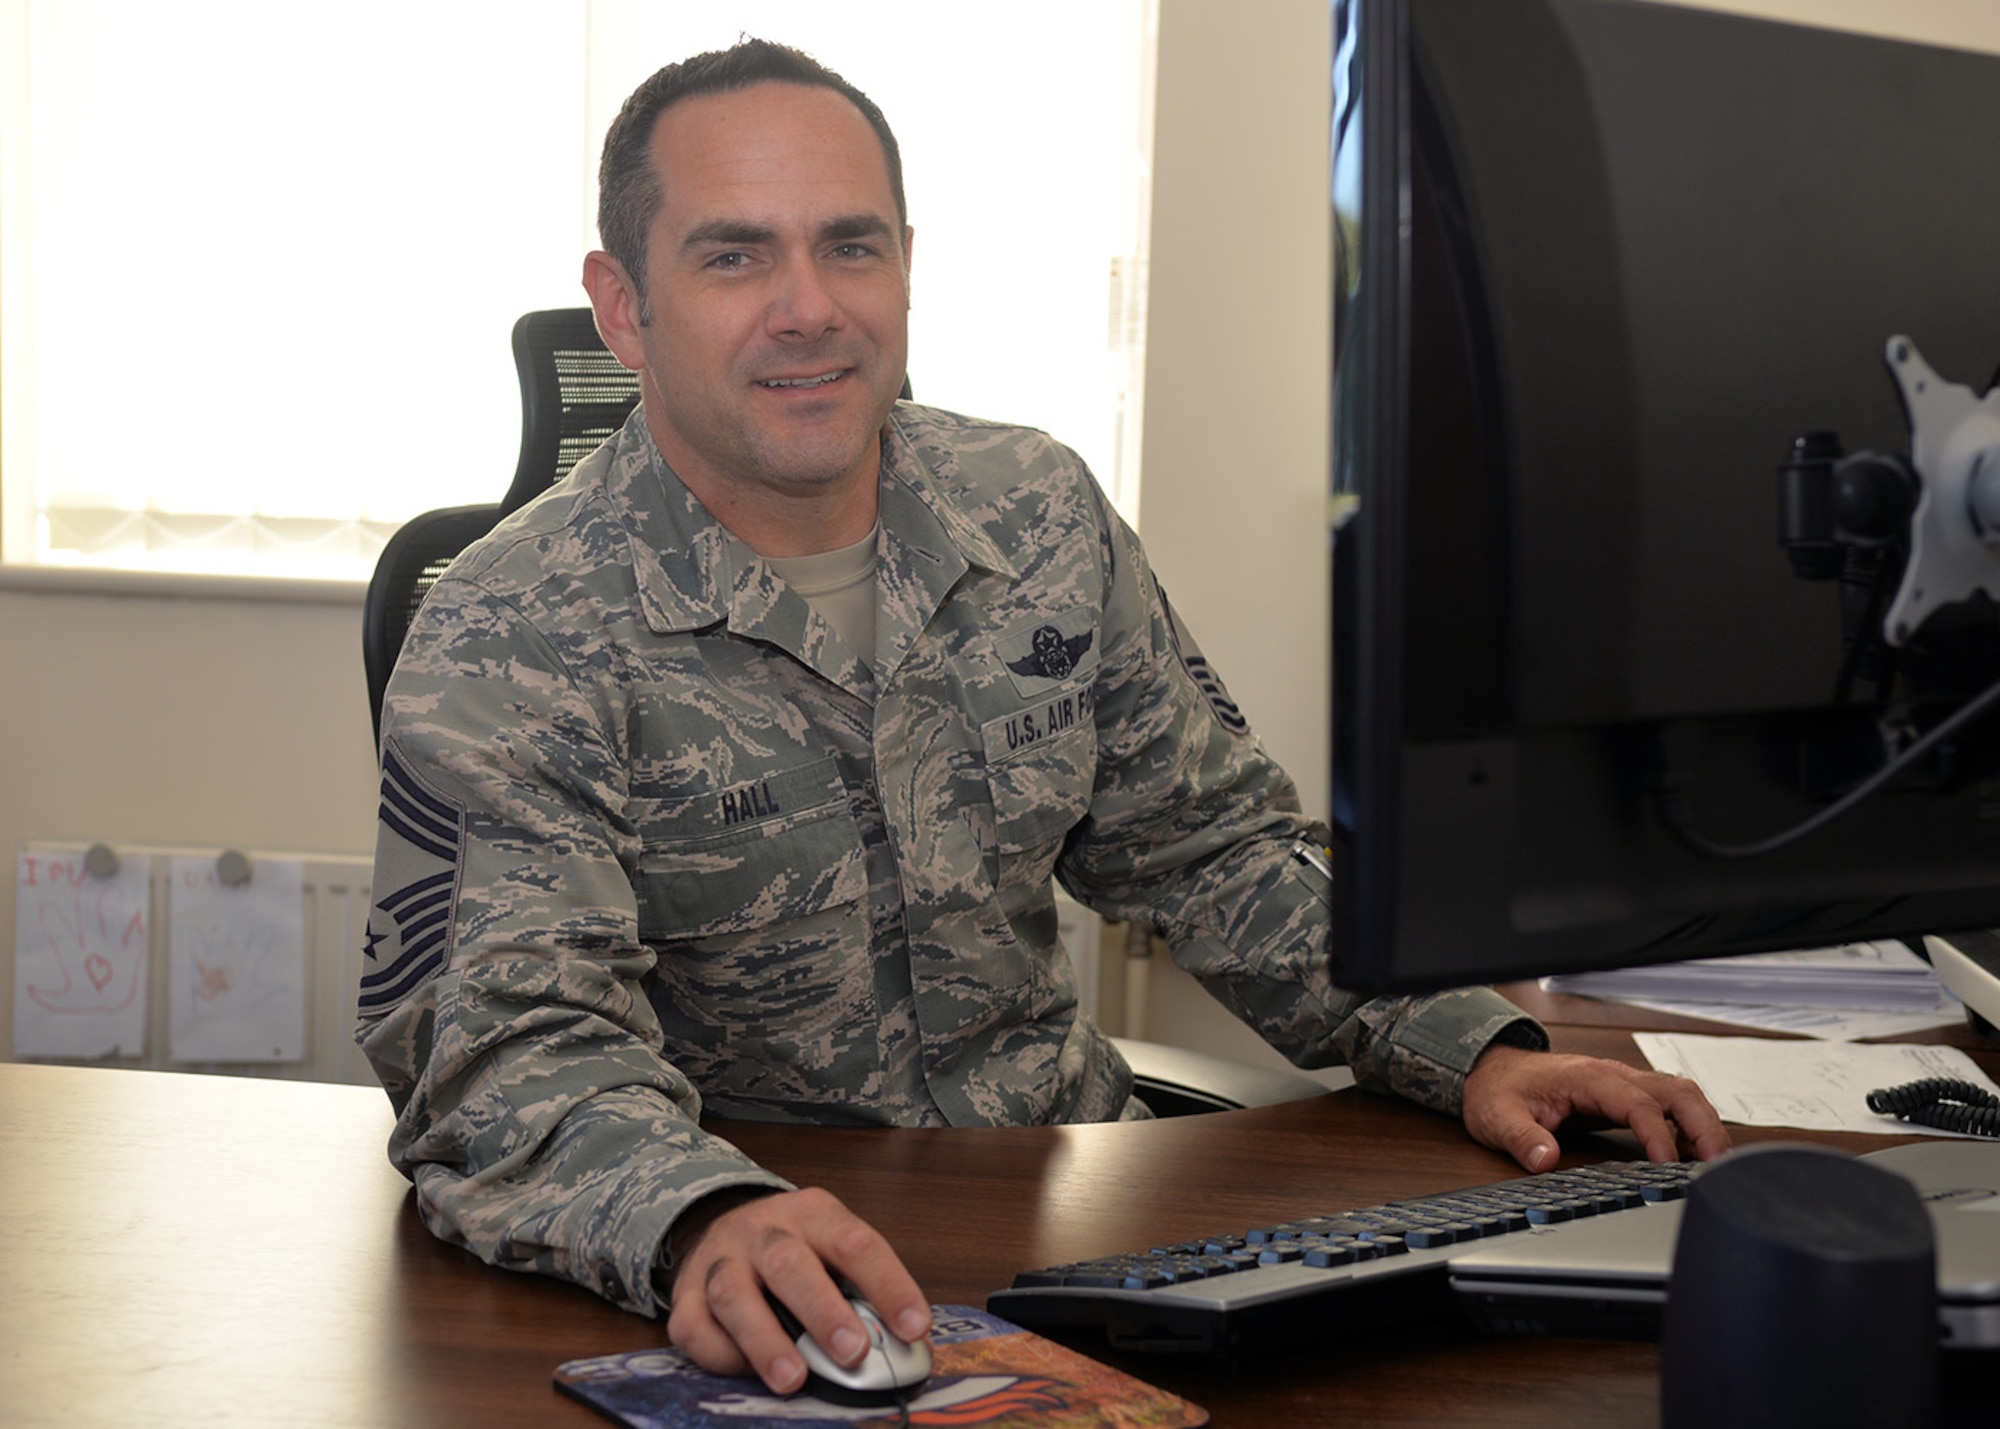 U.S. Air Force Chief Master Sgt. Dustin Hall, 352nd Special Operations Support Squadron chief enlisted manager, poses for a photo Sept. 8, 2016, on RAF Mildenhall, England. In September 2001, Hall was a staff sergeant in the 1st Airborne Communication and Control Squadron, based at Offutt Air Force Base, Neb. He was working as an airborne secure voice operator on an E4-B Advanced Aircraft Command Post aircraft when the news broke of the Sept. 11 attacks in New York. (U.S. Air Force photo by Karen Abeyasekere)